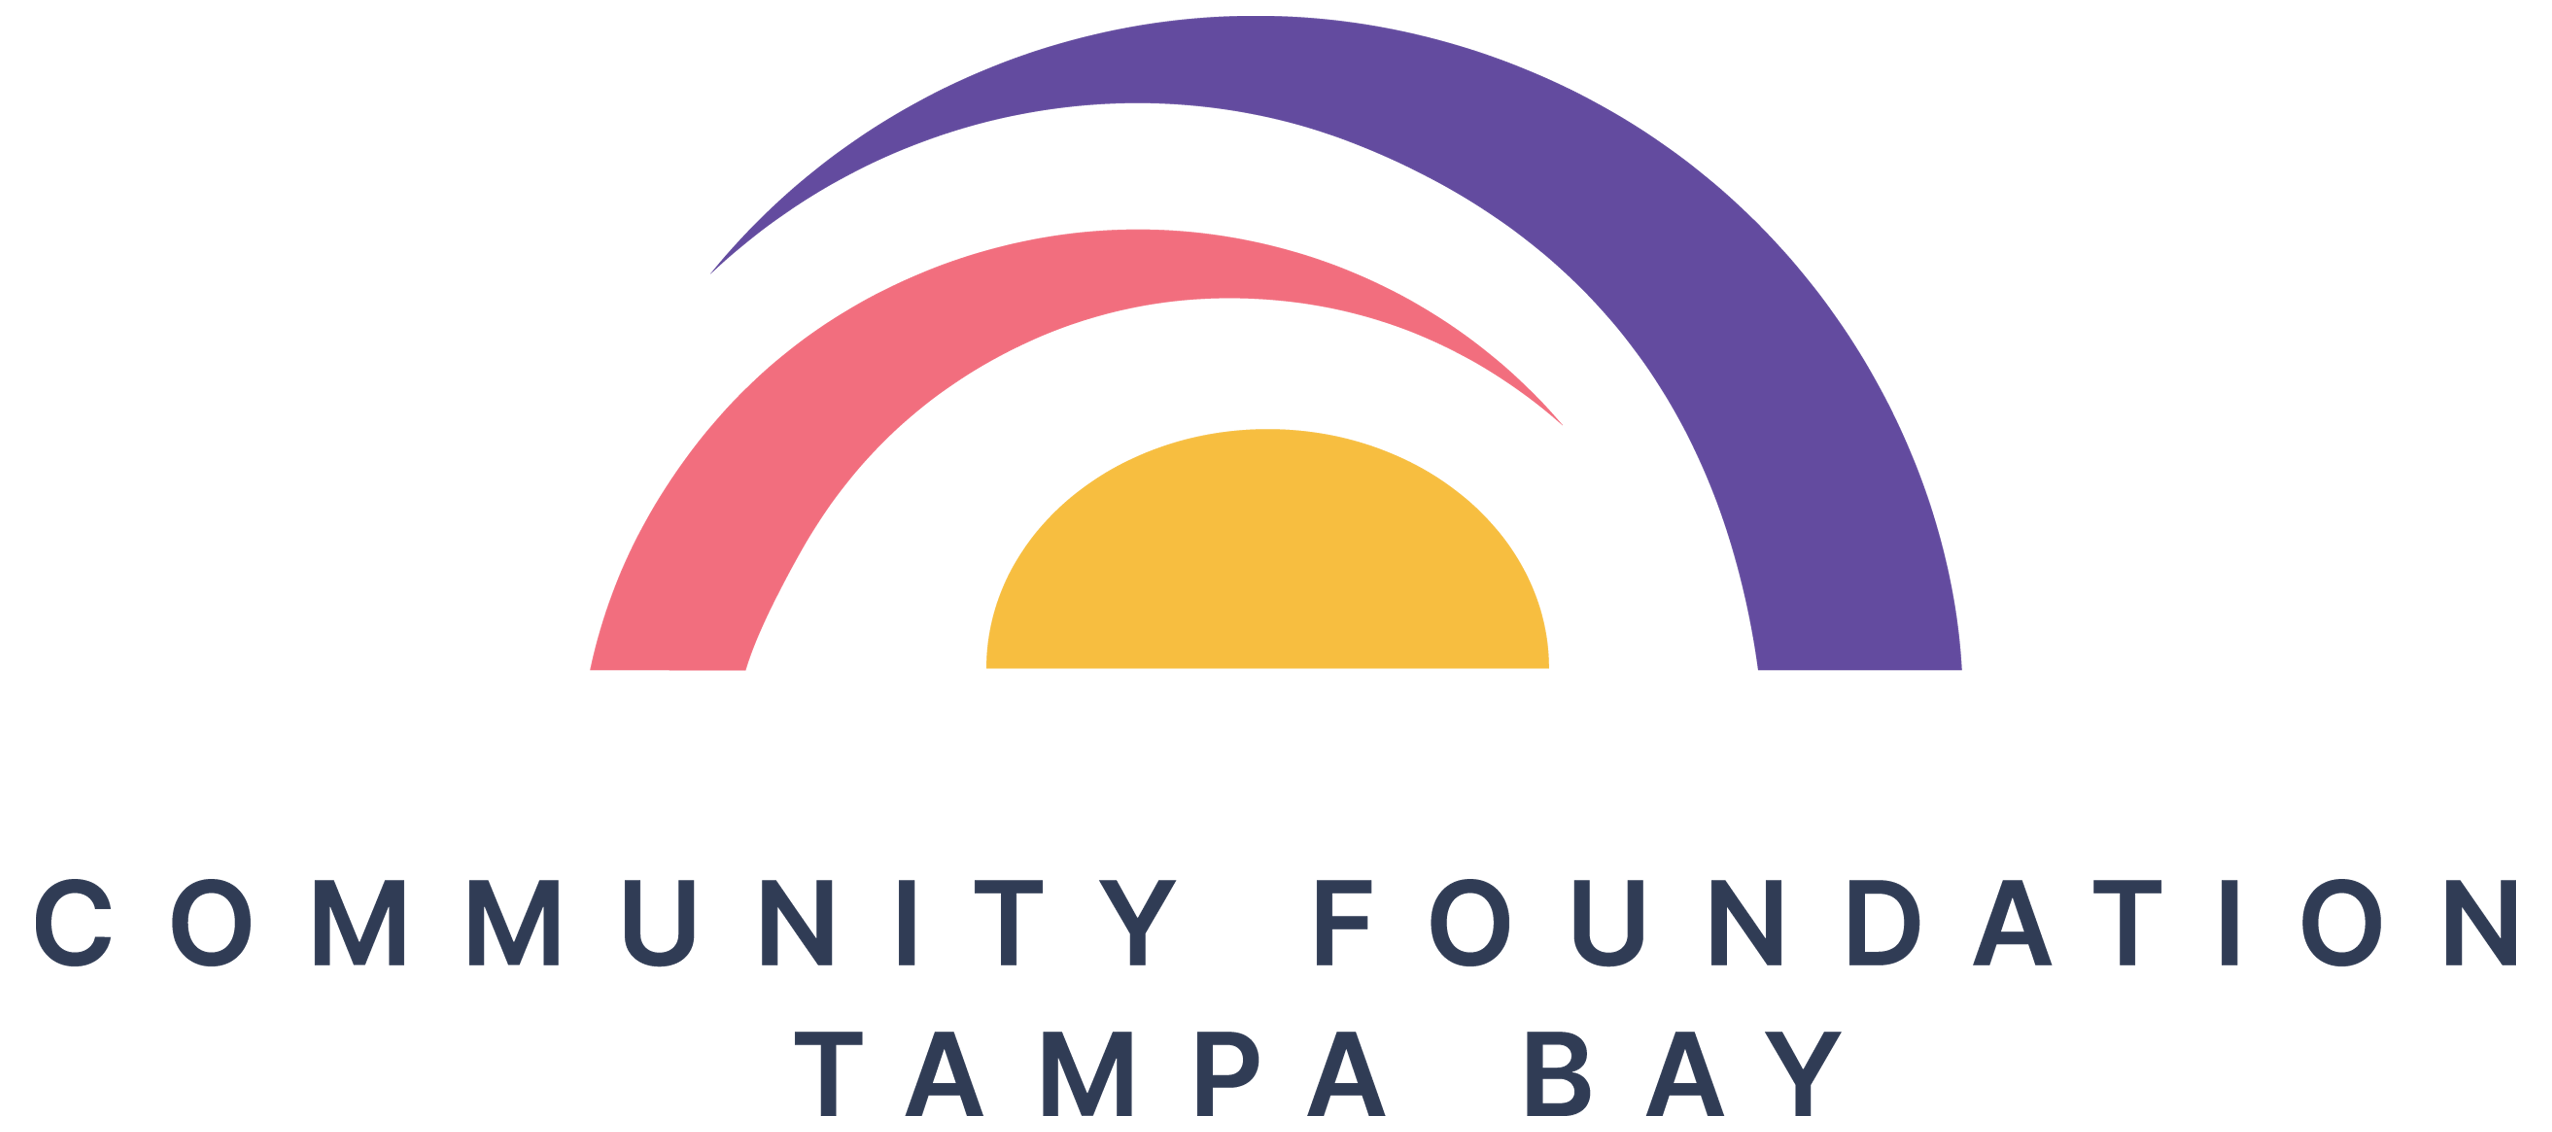 HUGE thanks to the Community Foundation of Tampa Bay!